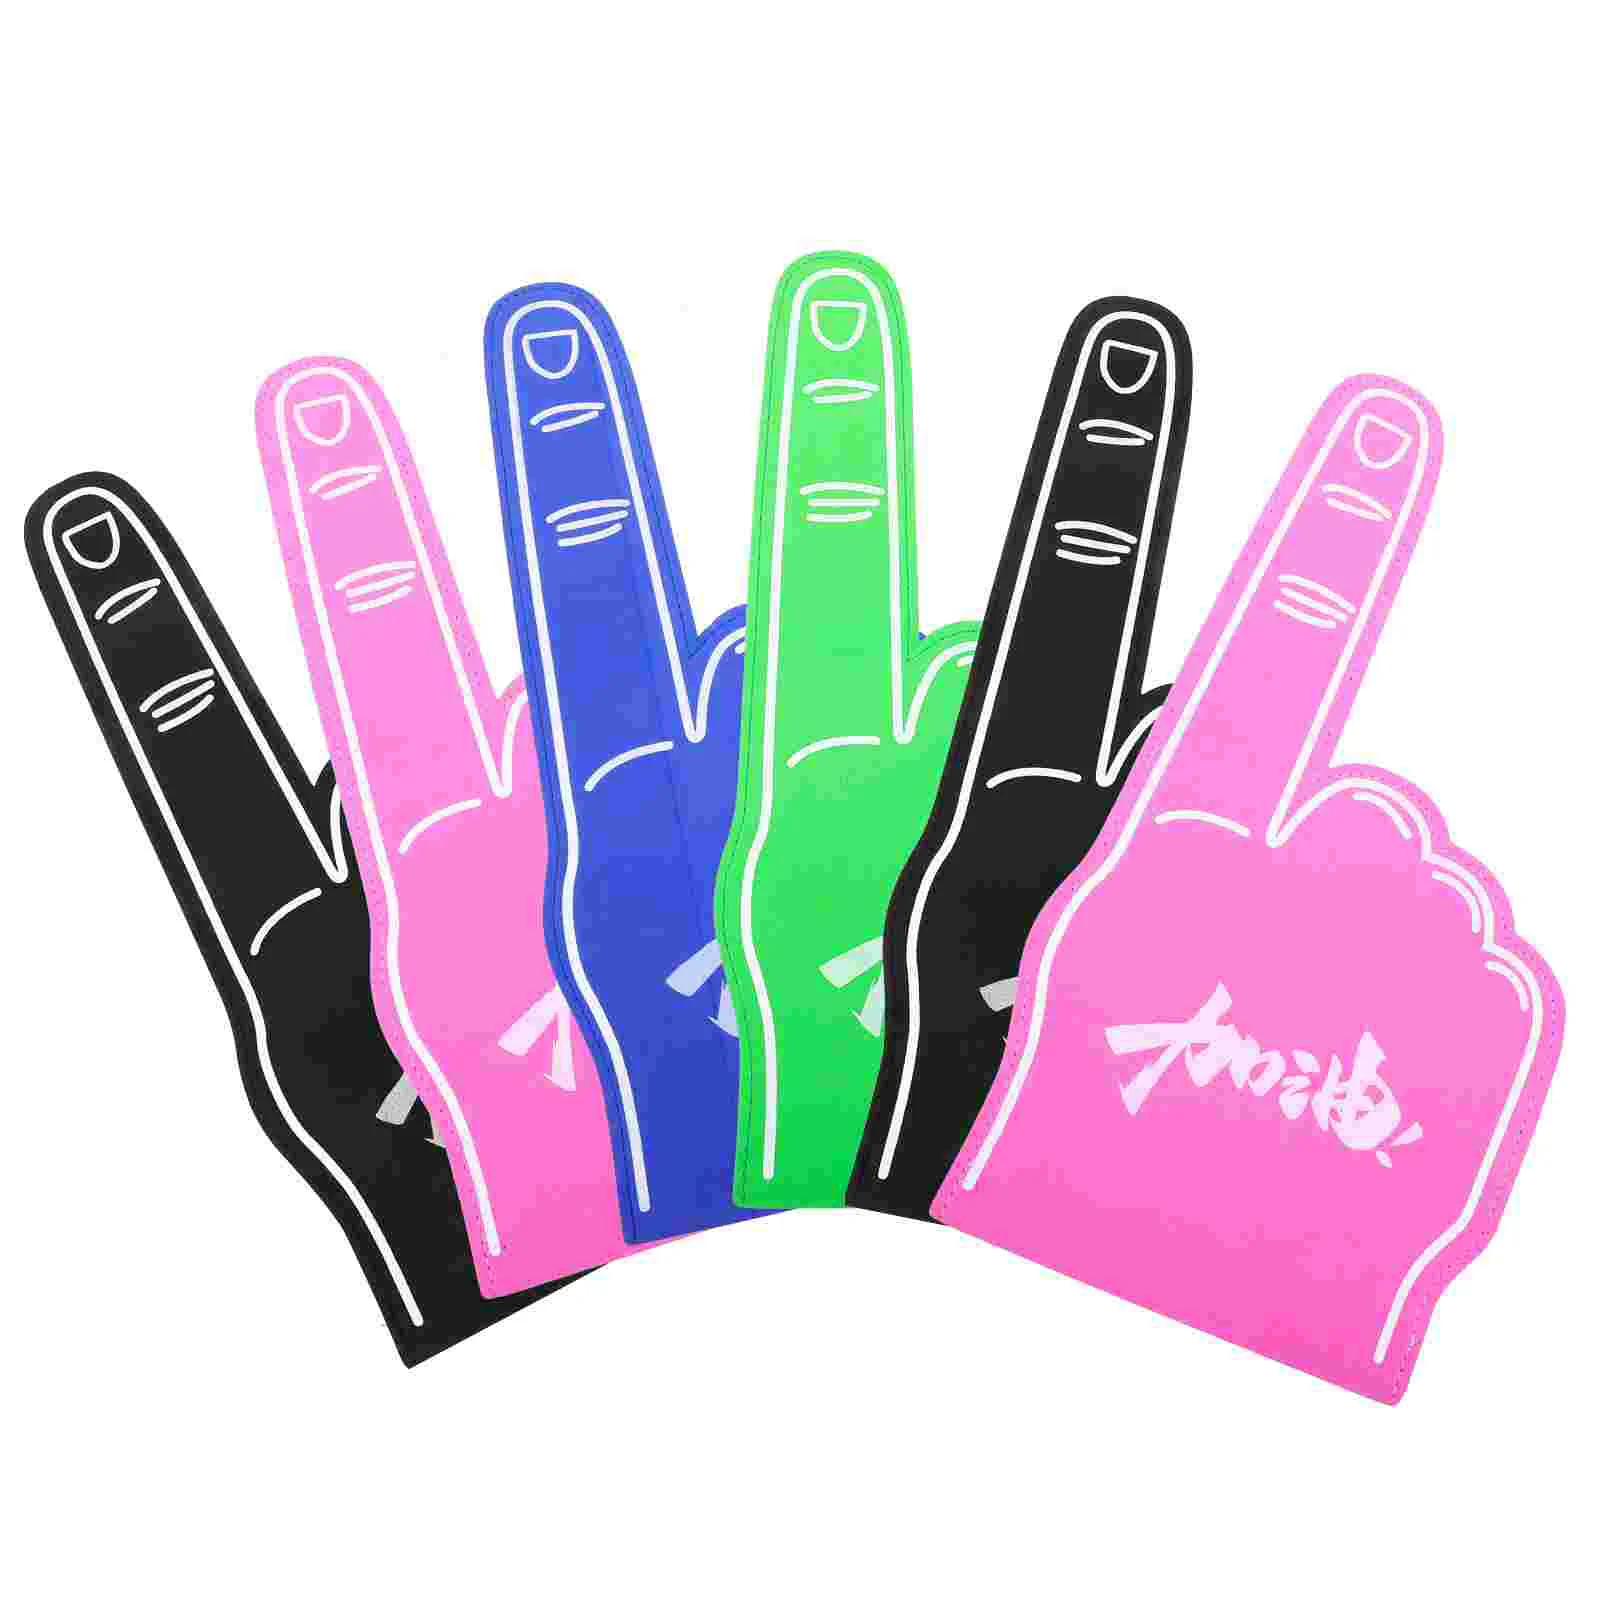 

6pcs Fingers Hand for All Occasions Cheerleading Pompom for Sports Exciting Colors Athletics Local Events Games